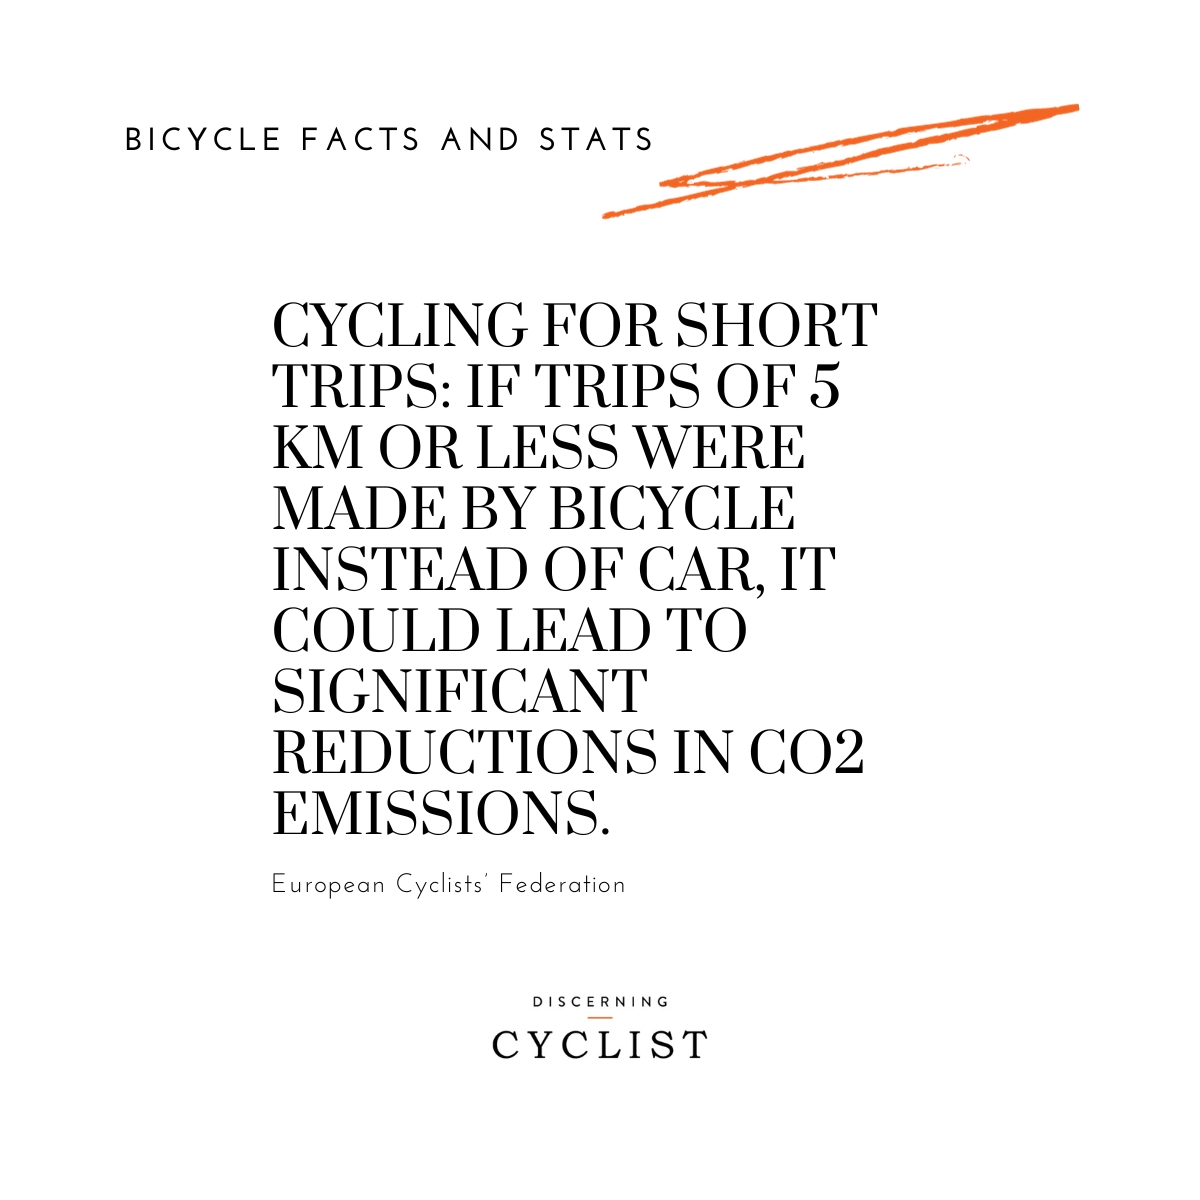 Cycling for Short Trips: If trips of 5 km or less were made by bicycle instead of car, it could lead to significant reductions in CO2 emissions.